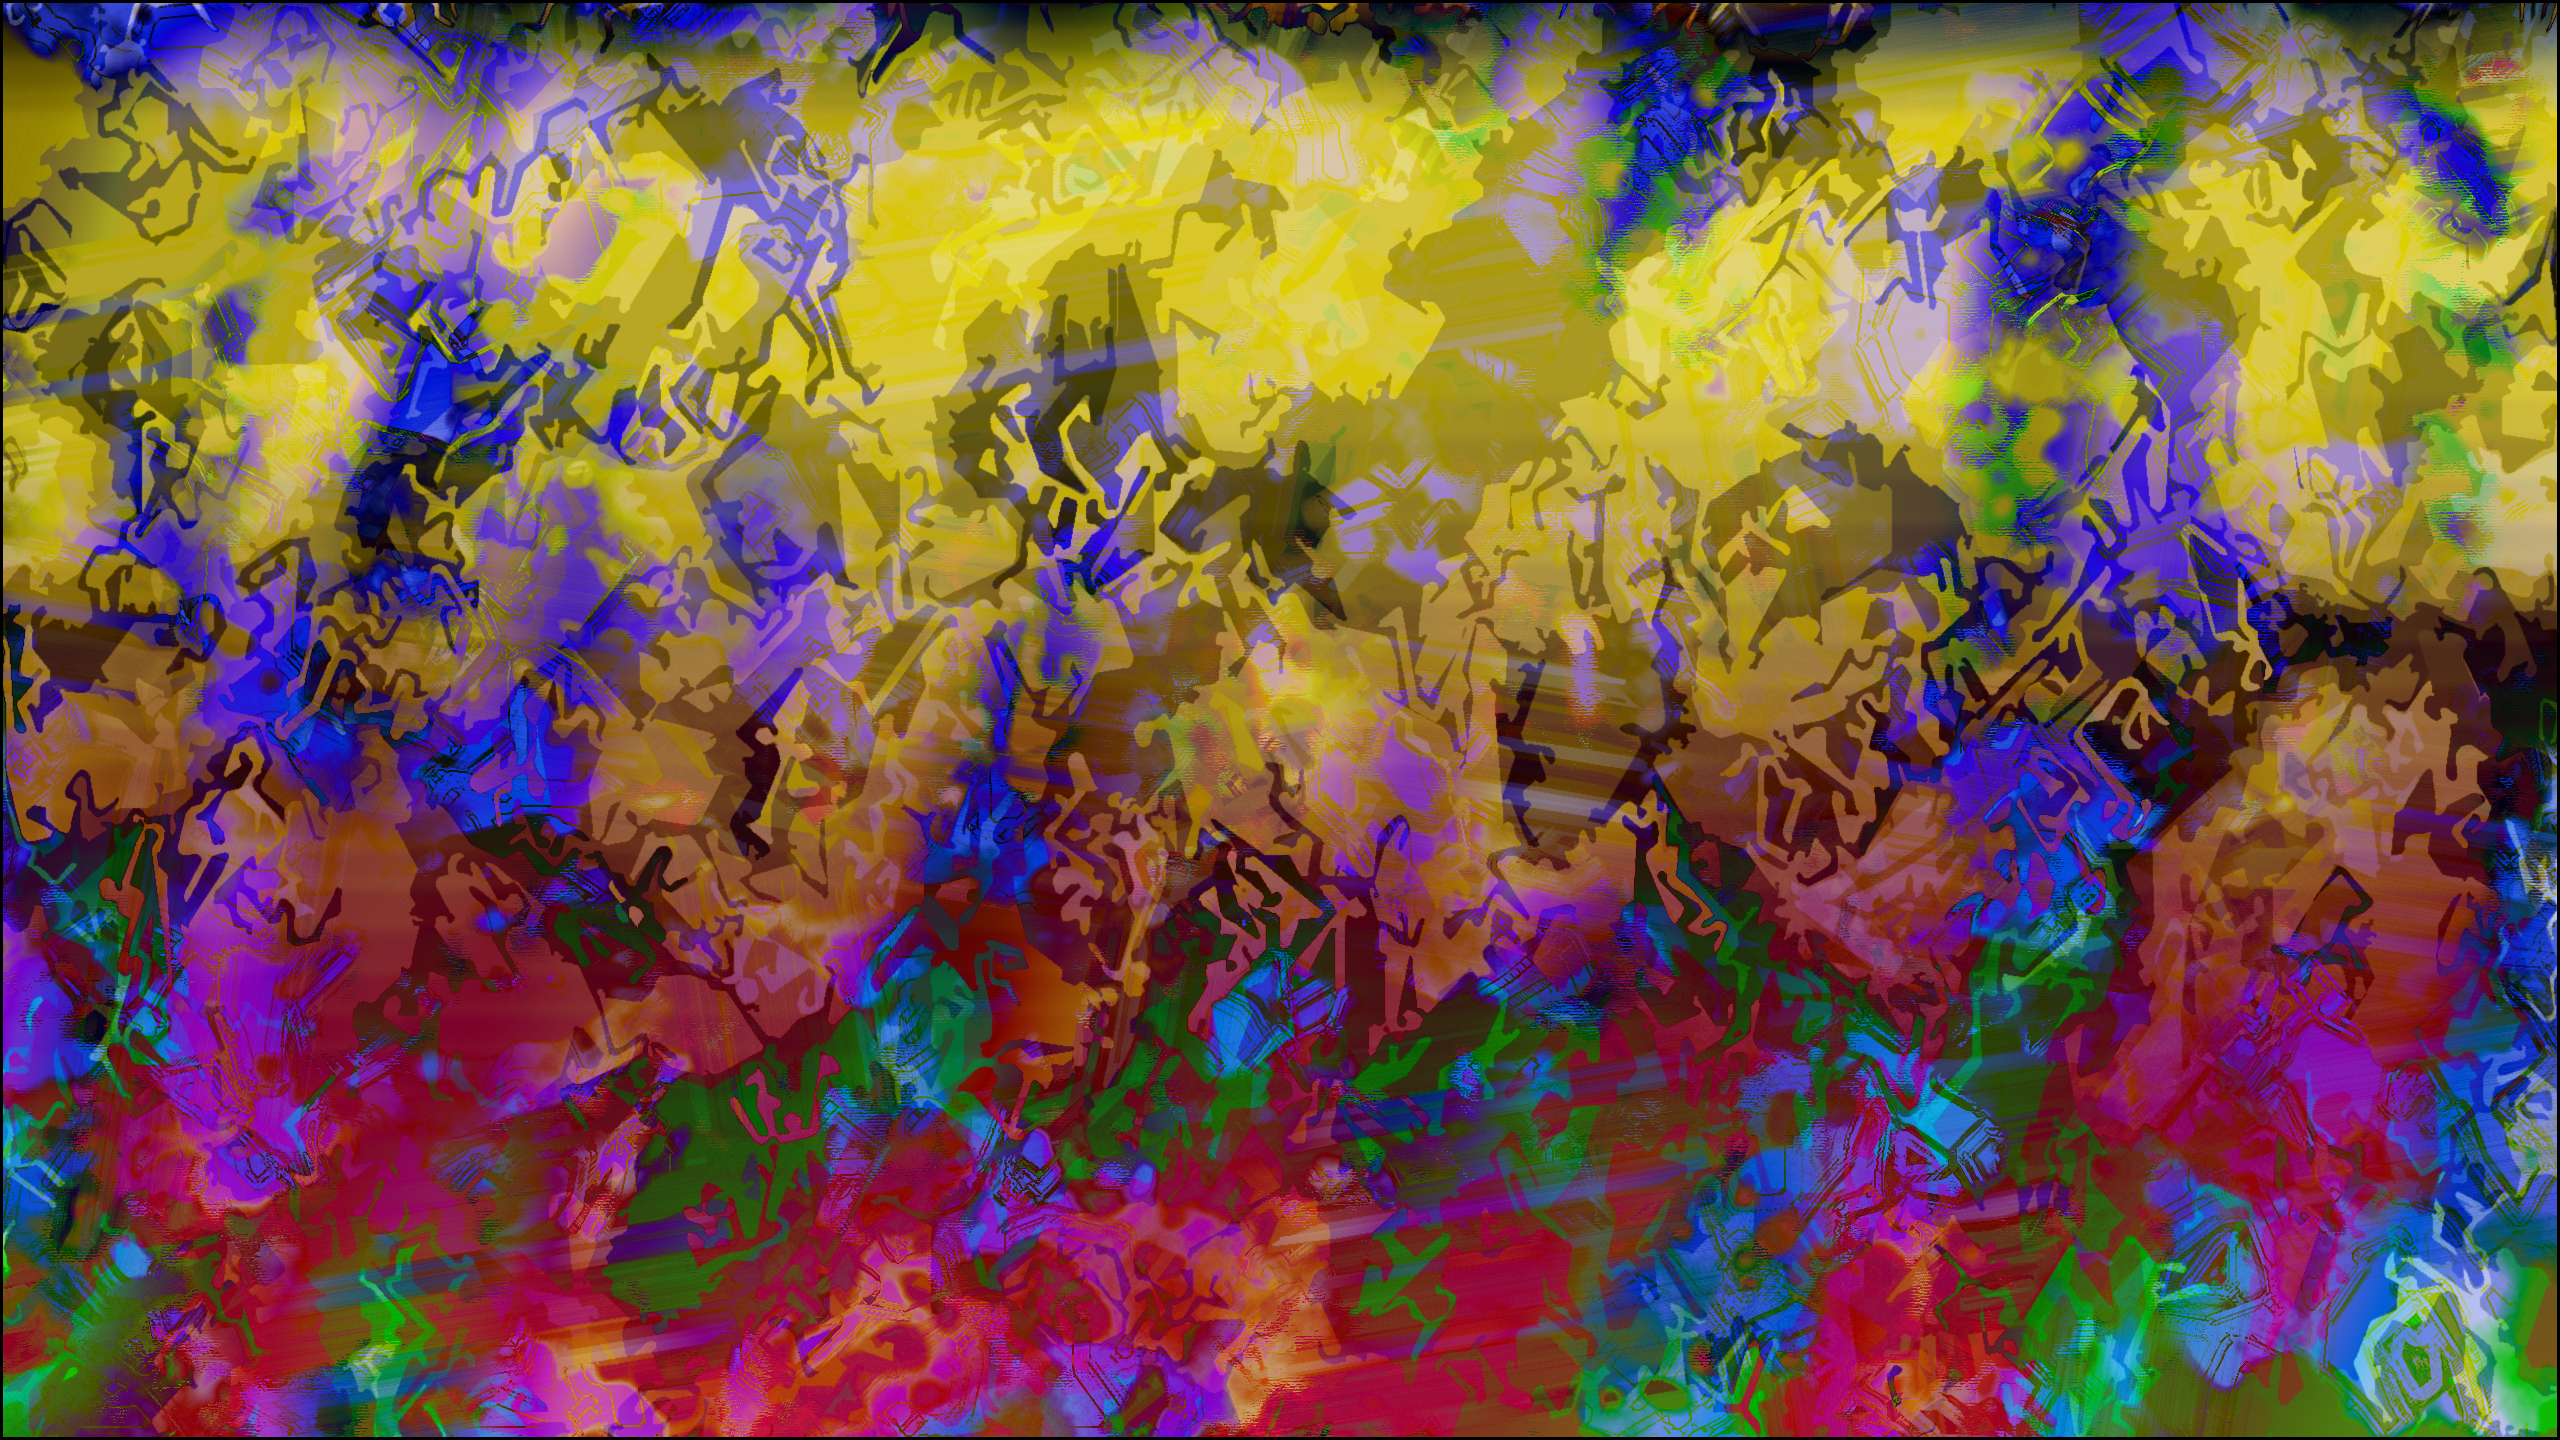 Abstract Digital Art Trippy Psychedelic Brightness 2560x1440